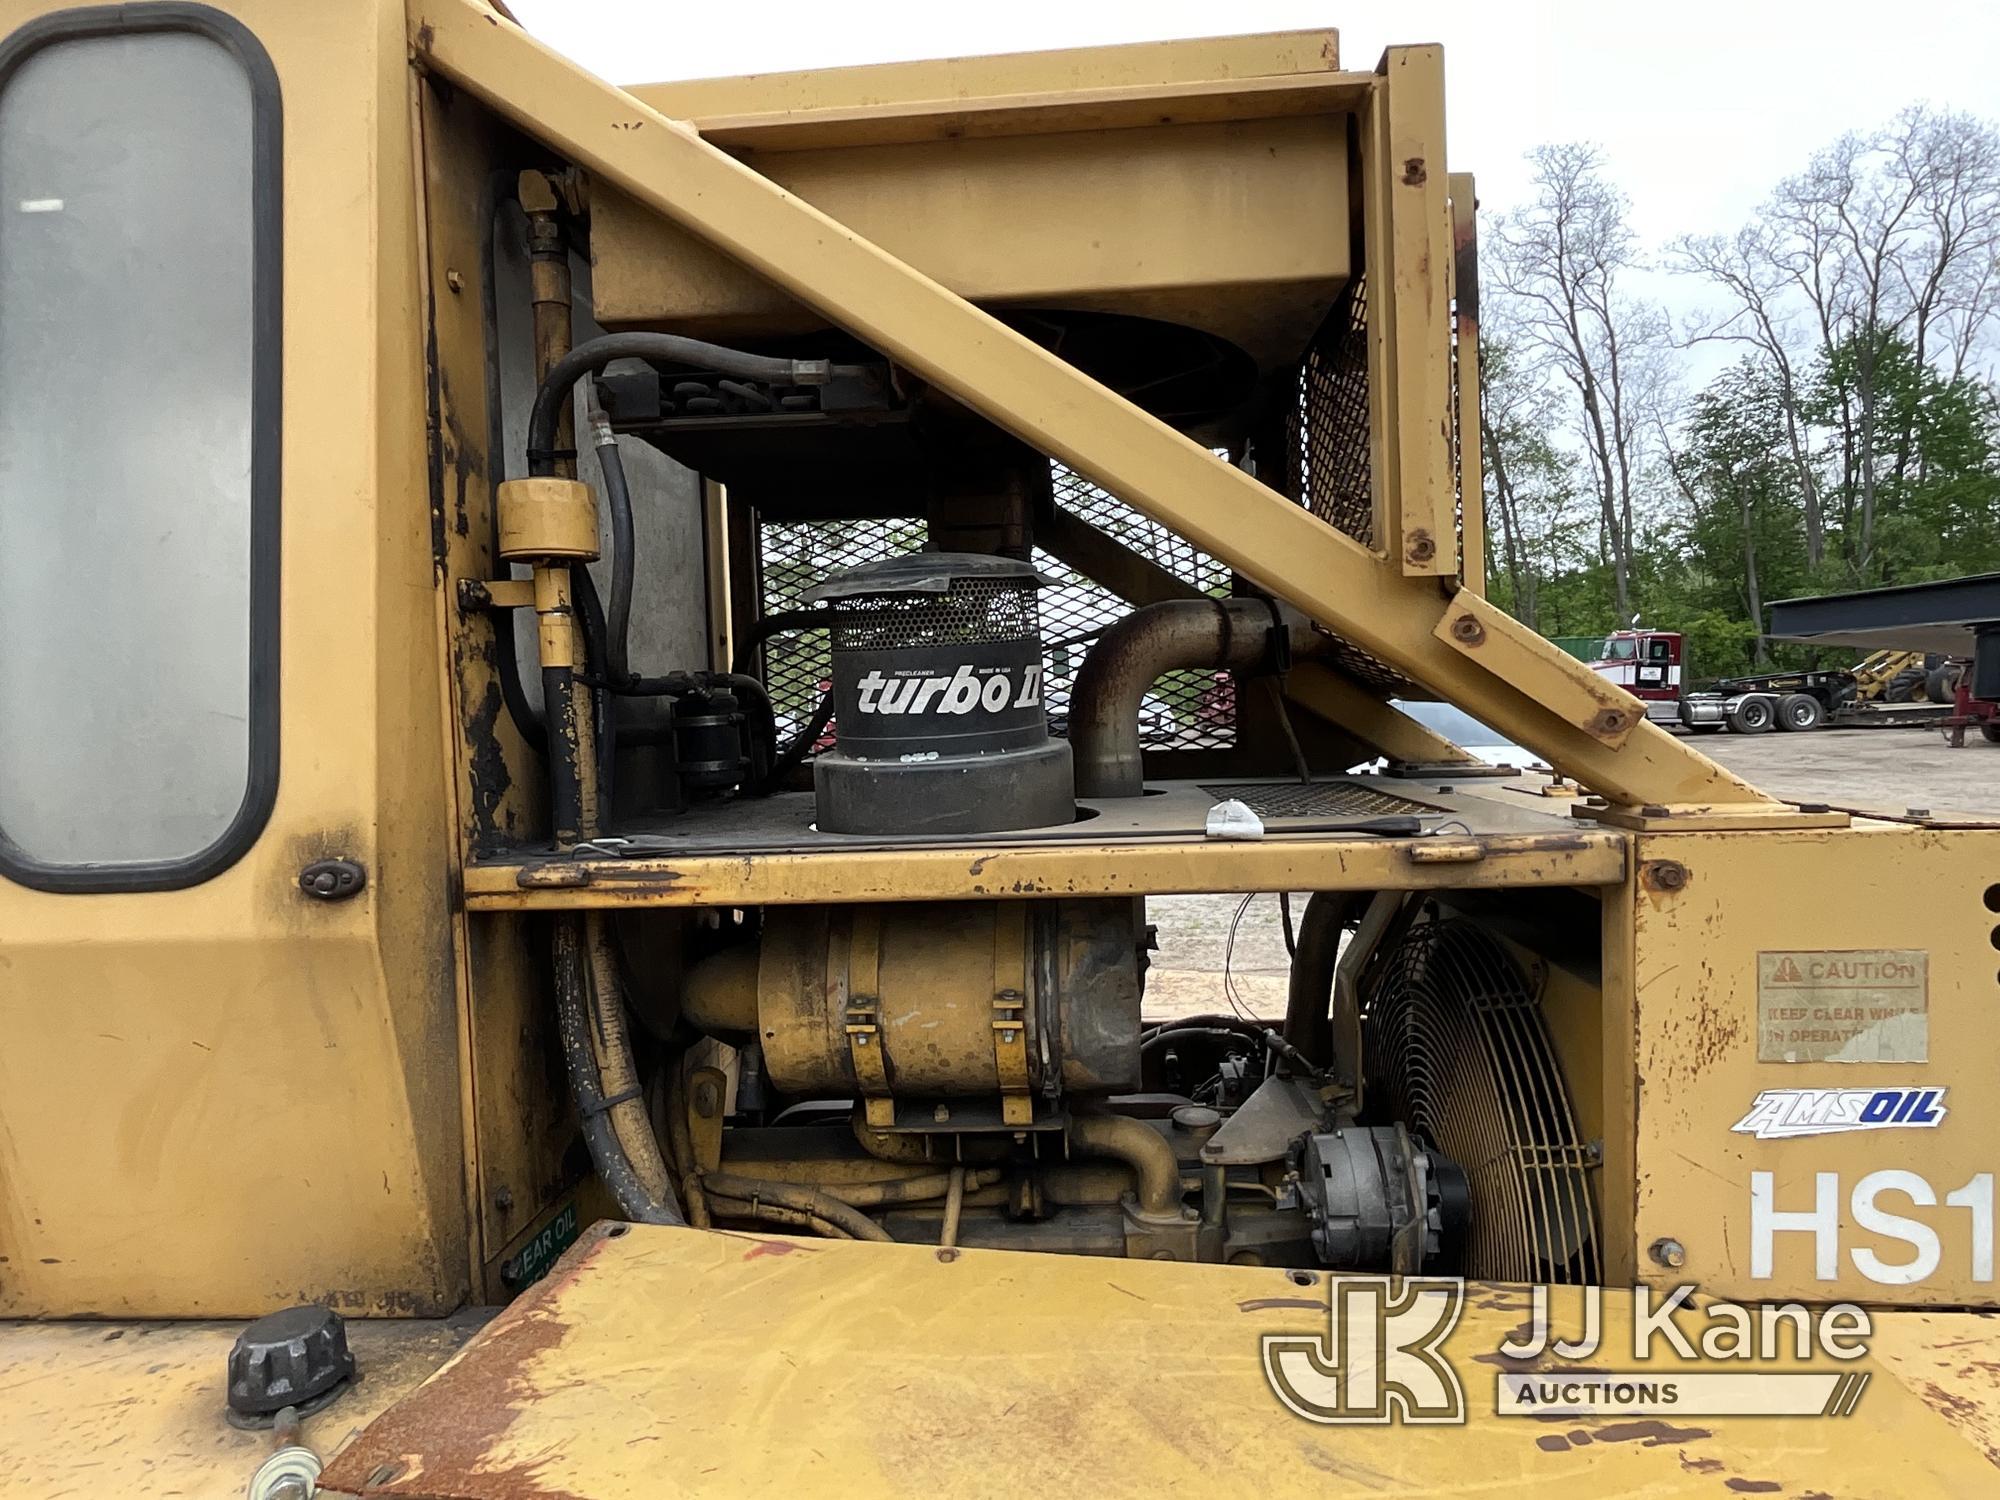 (Grand Rapids, MI) 2000 Rayco T175 Crawler Tractor Not Running, Condition Unknown) (Missing Parts) (